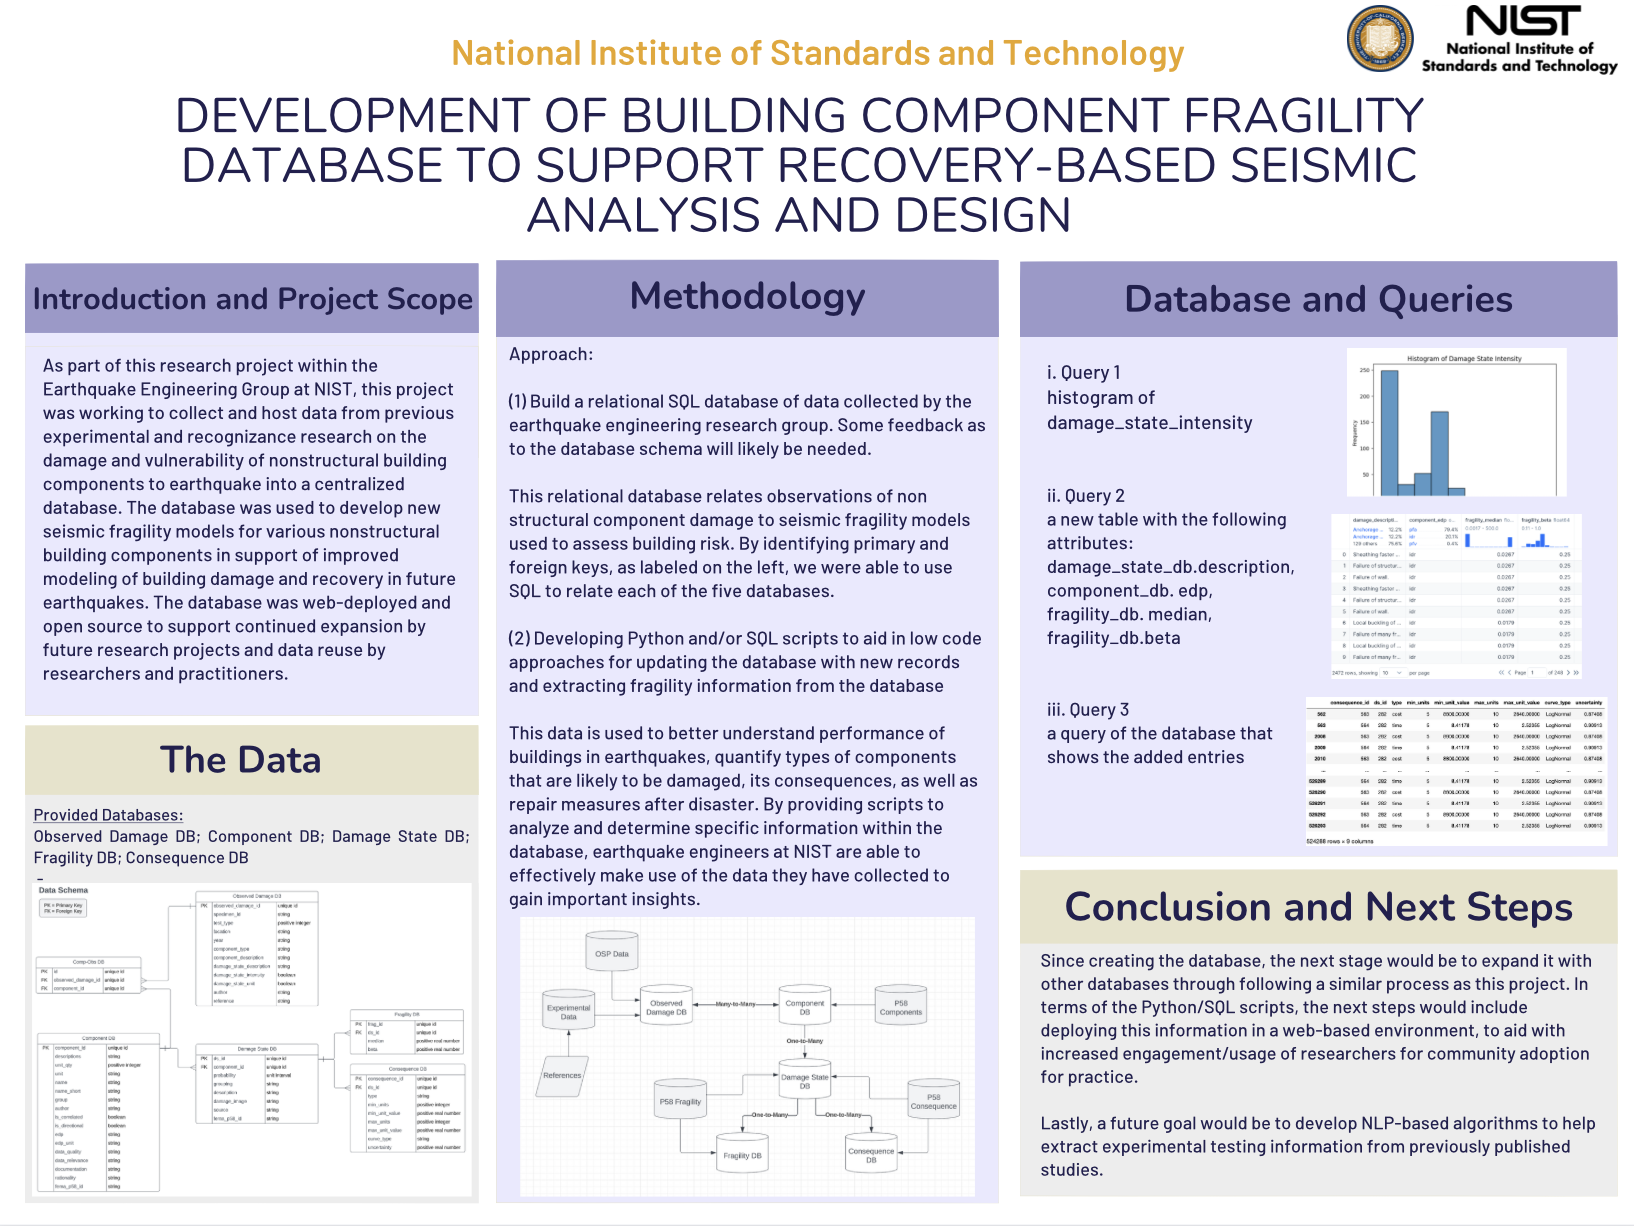 Development of Building Component Fragility Database to Support Recovery-Based Seismic Analysis and Design